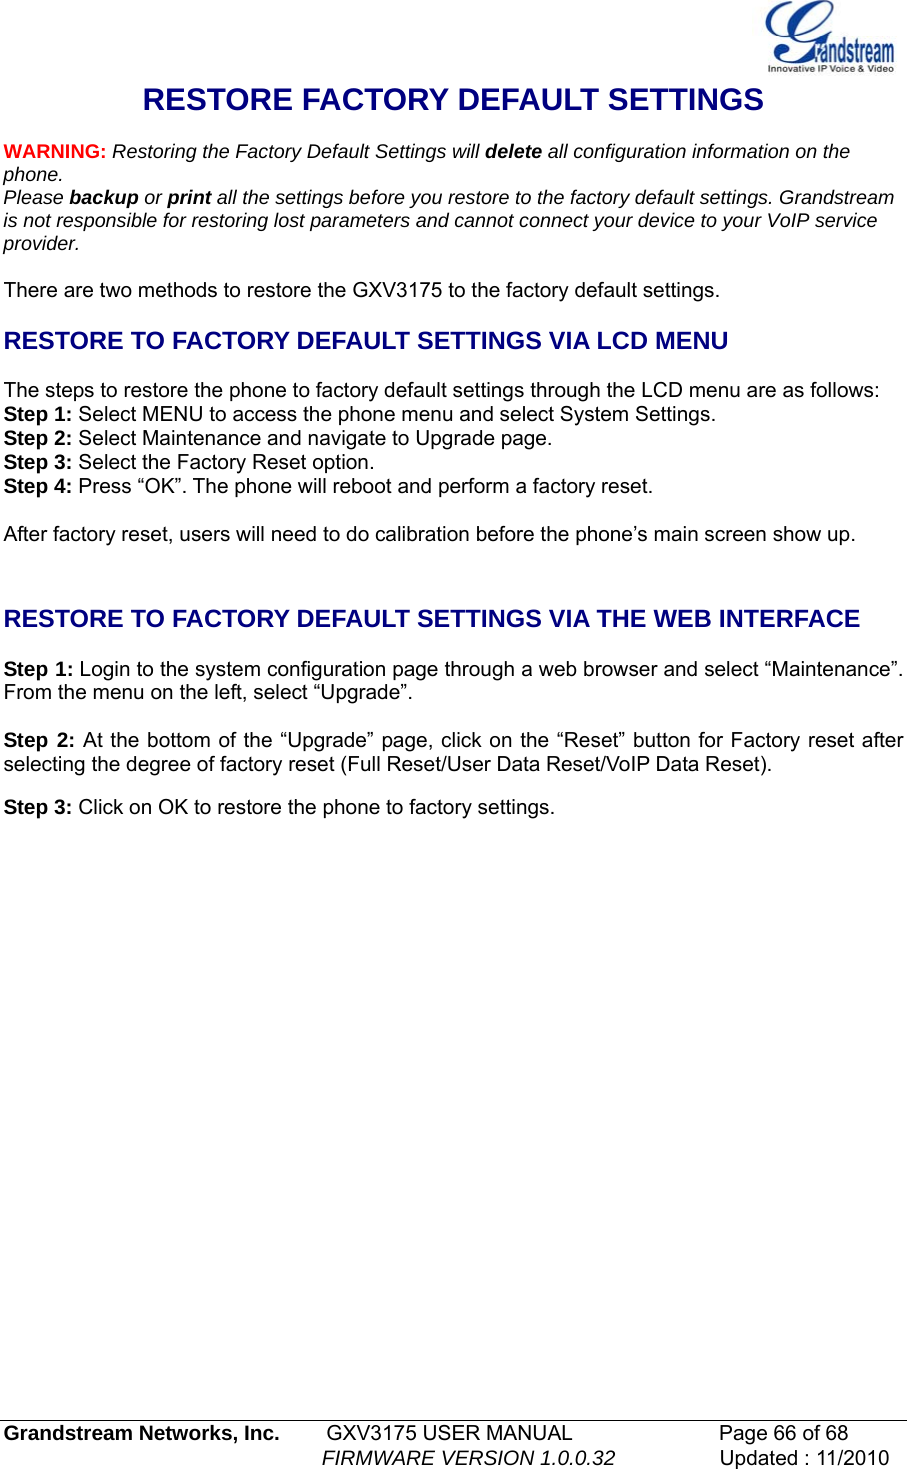   Grandstream Networks, Inc.        GXV3175 USER MANUAL                      Page 66 of 68                                                        FIRMWARE VERSION 1.0.0.32                  Updated : 11/2010  RESTORE FACTORY DEFAULT SETTINGS  WARNING: Restoring the Factory Default Settings will delete all configuration information on the phone. Please backup or print all the settings before you restore to the factory default settings. Grandstream is not responsible for restoring lost parameters and cannot connect your device to your VoIP service provider.  There are two methods to restore the GXV3175 to the factory default settings.  RESTORE TO FACTORY DEFAULT SETTINGS VIA LCD MENU  The steps to restore the phone to factory default settings through the LCD menu are as follows: Step 1: Select MENU to access the phone menu and select System Settings.  Step 2: Select Maintenance and navigate to Upgrade page. Step 3: Select the Factory Reset option.  Step 4: Press “OK”. The phone will reboot and perform a factory reset.  After factory reset, users will need to do calibration before the phone’s main screen show up.   RESTORE TO FACTORY DEFAULT SETTINGS VIA THE WEB INTERFACE   Step 1: Login to the system configuration page through a web browser and select “Maintenance”. From the menu on the left, select “Upgrade”.  Step 2: At the bottom of the “Upgrade” page, click on the “Reset” button for Factory reset after selecting the degree of factory reset (Full Reset/User Data Reset/VoIP Data Reset).   Step 3: Click on OK to restore the phone to factory settings.                 